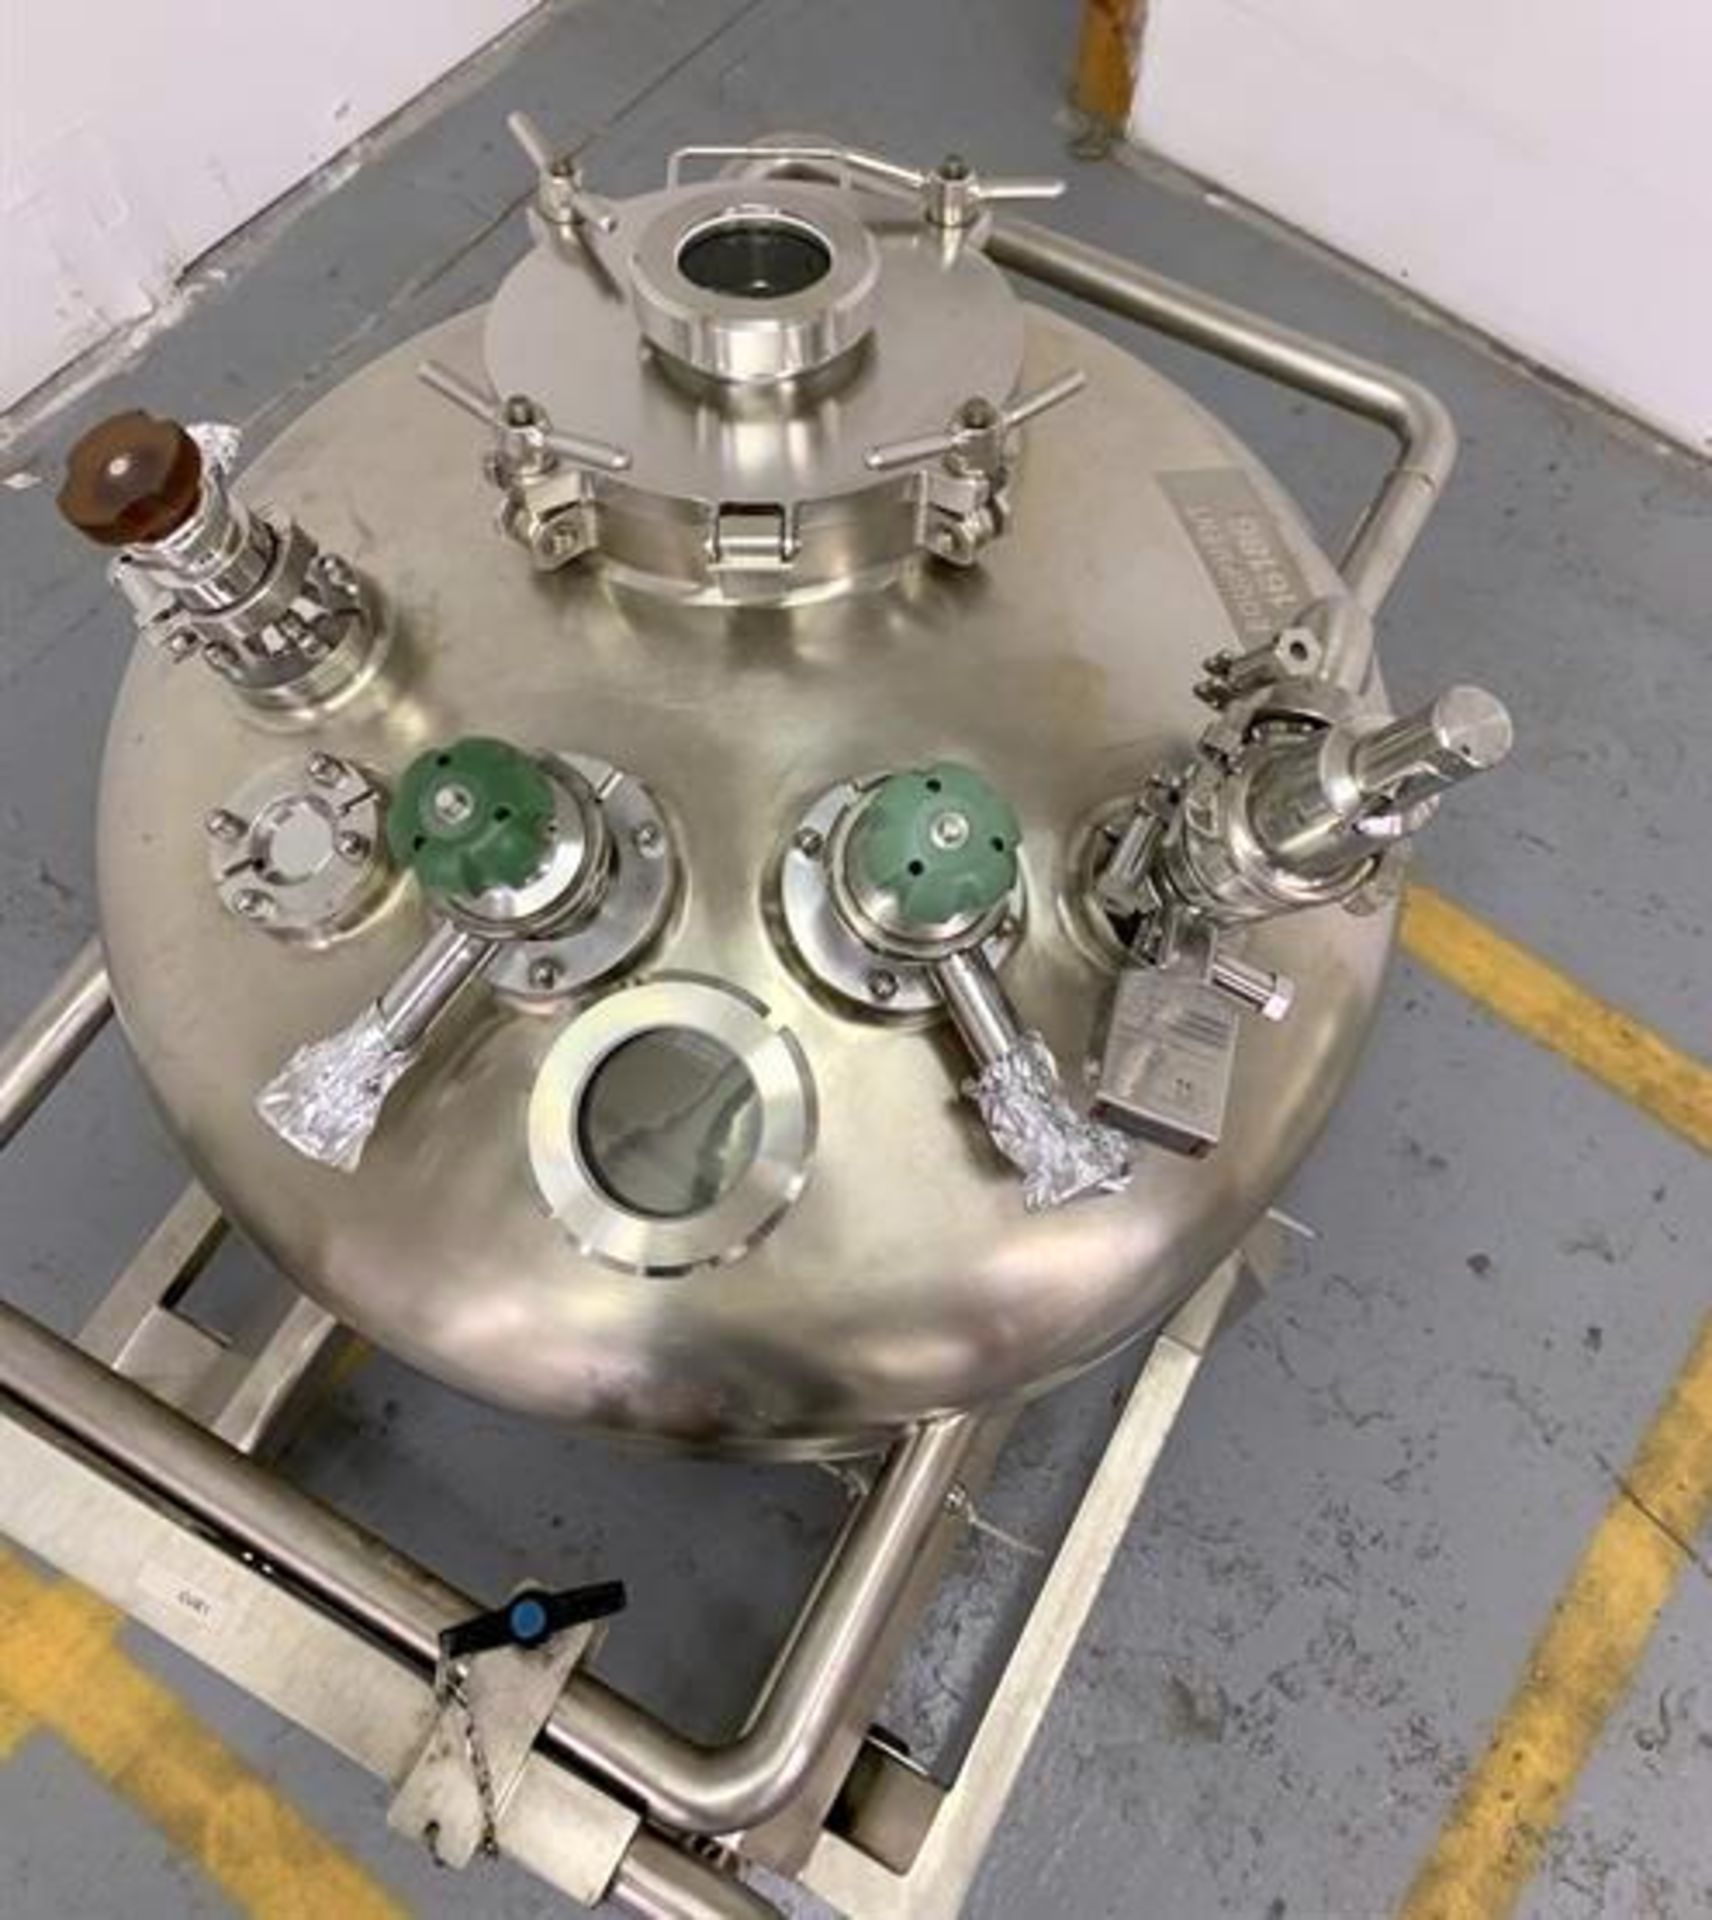 Inox'ouest Pressure Mix Tank - Image 4 of 9